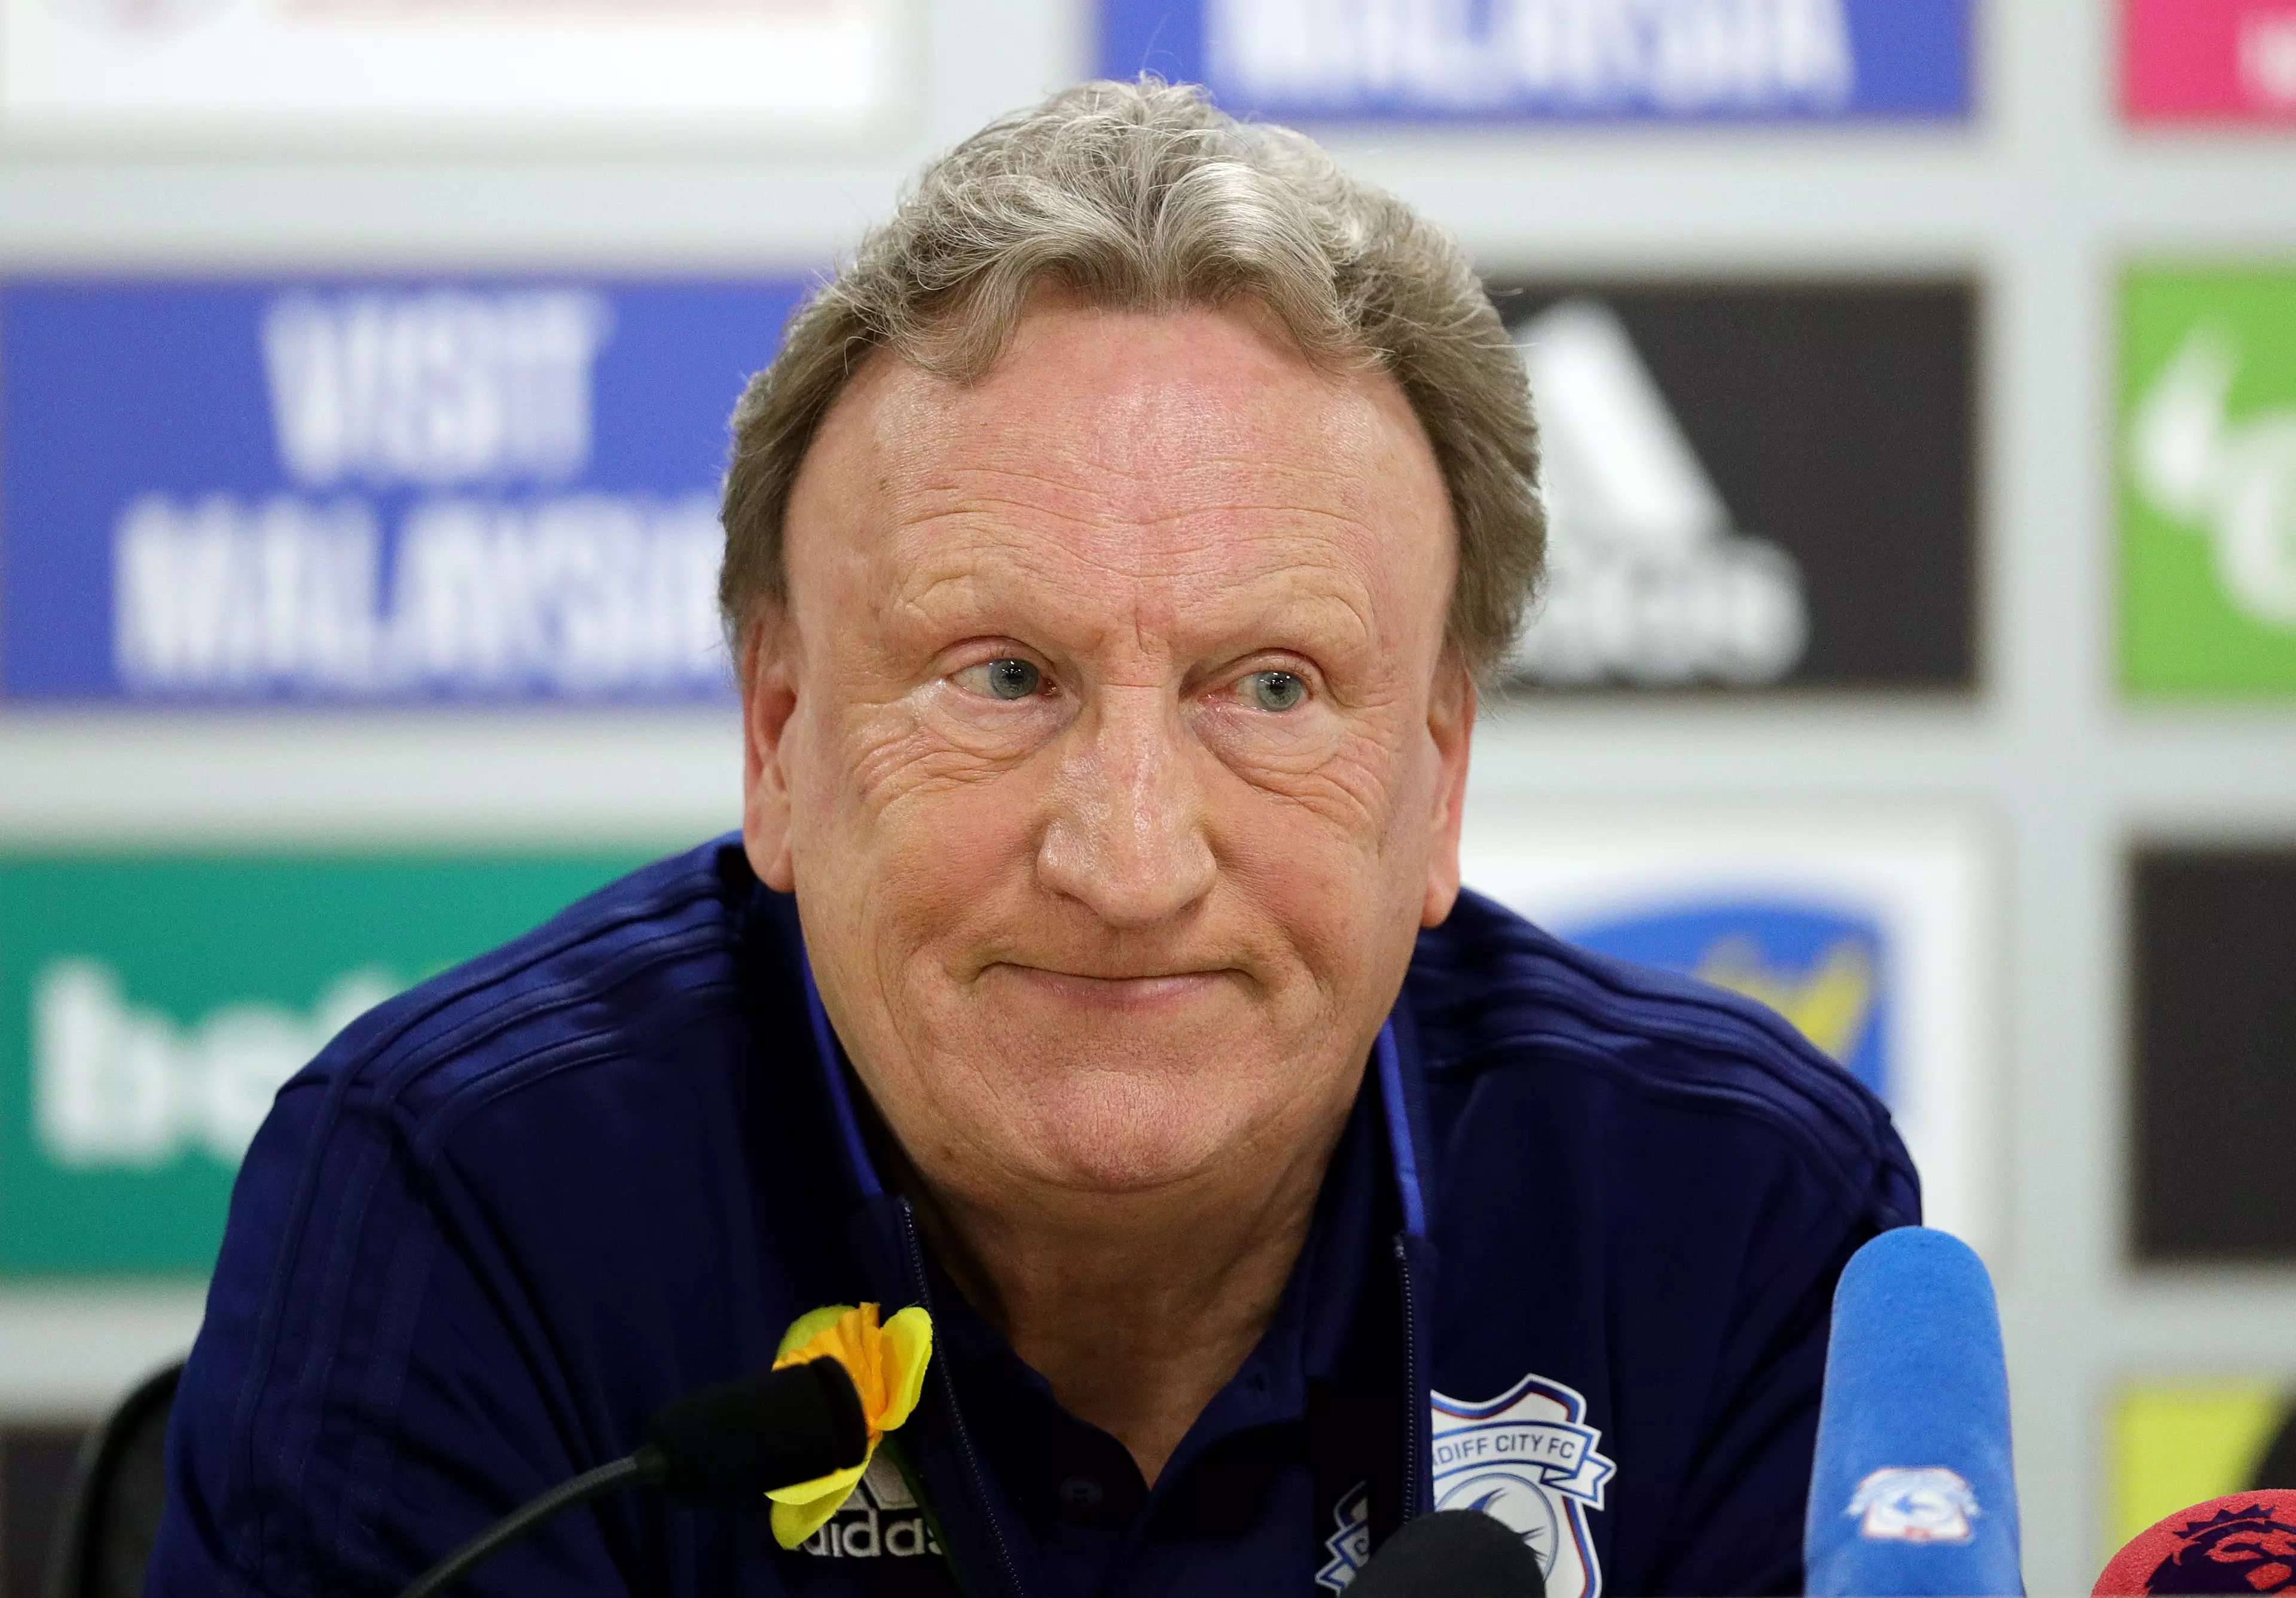 Neil Warnock won't like what he sees. Image: PA Images